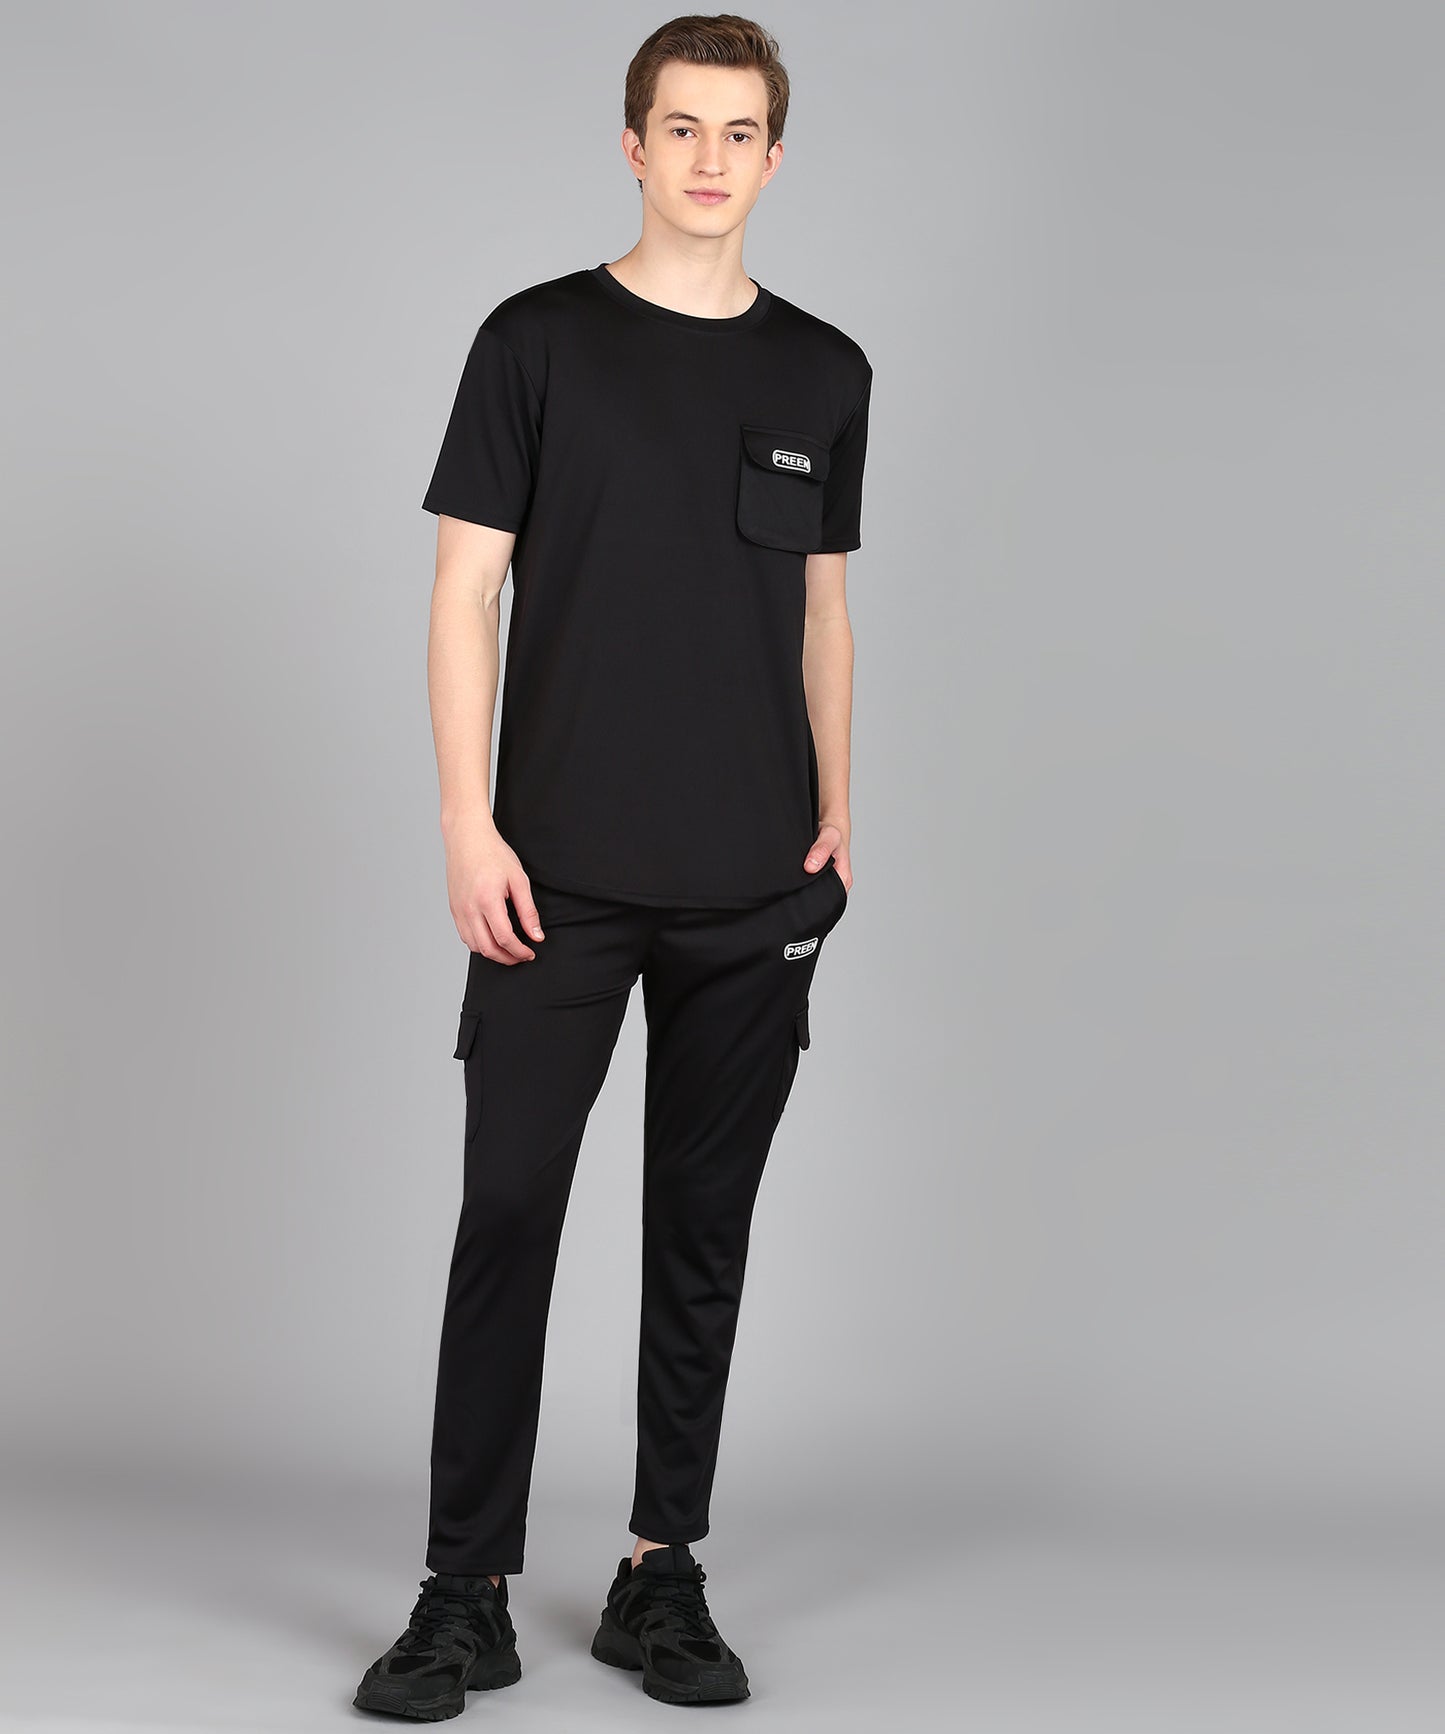 Preen Men's Black Colour Solid T-shirt and Lower Set